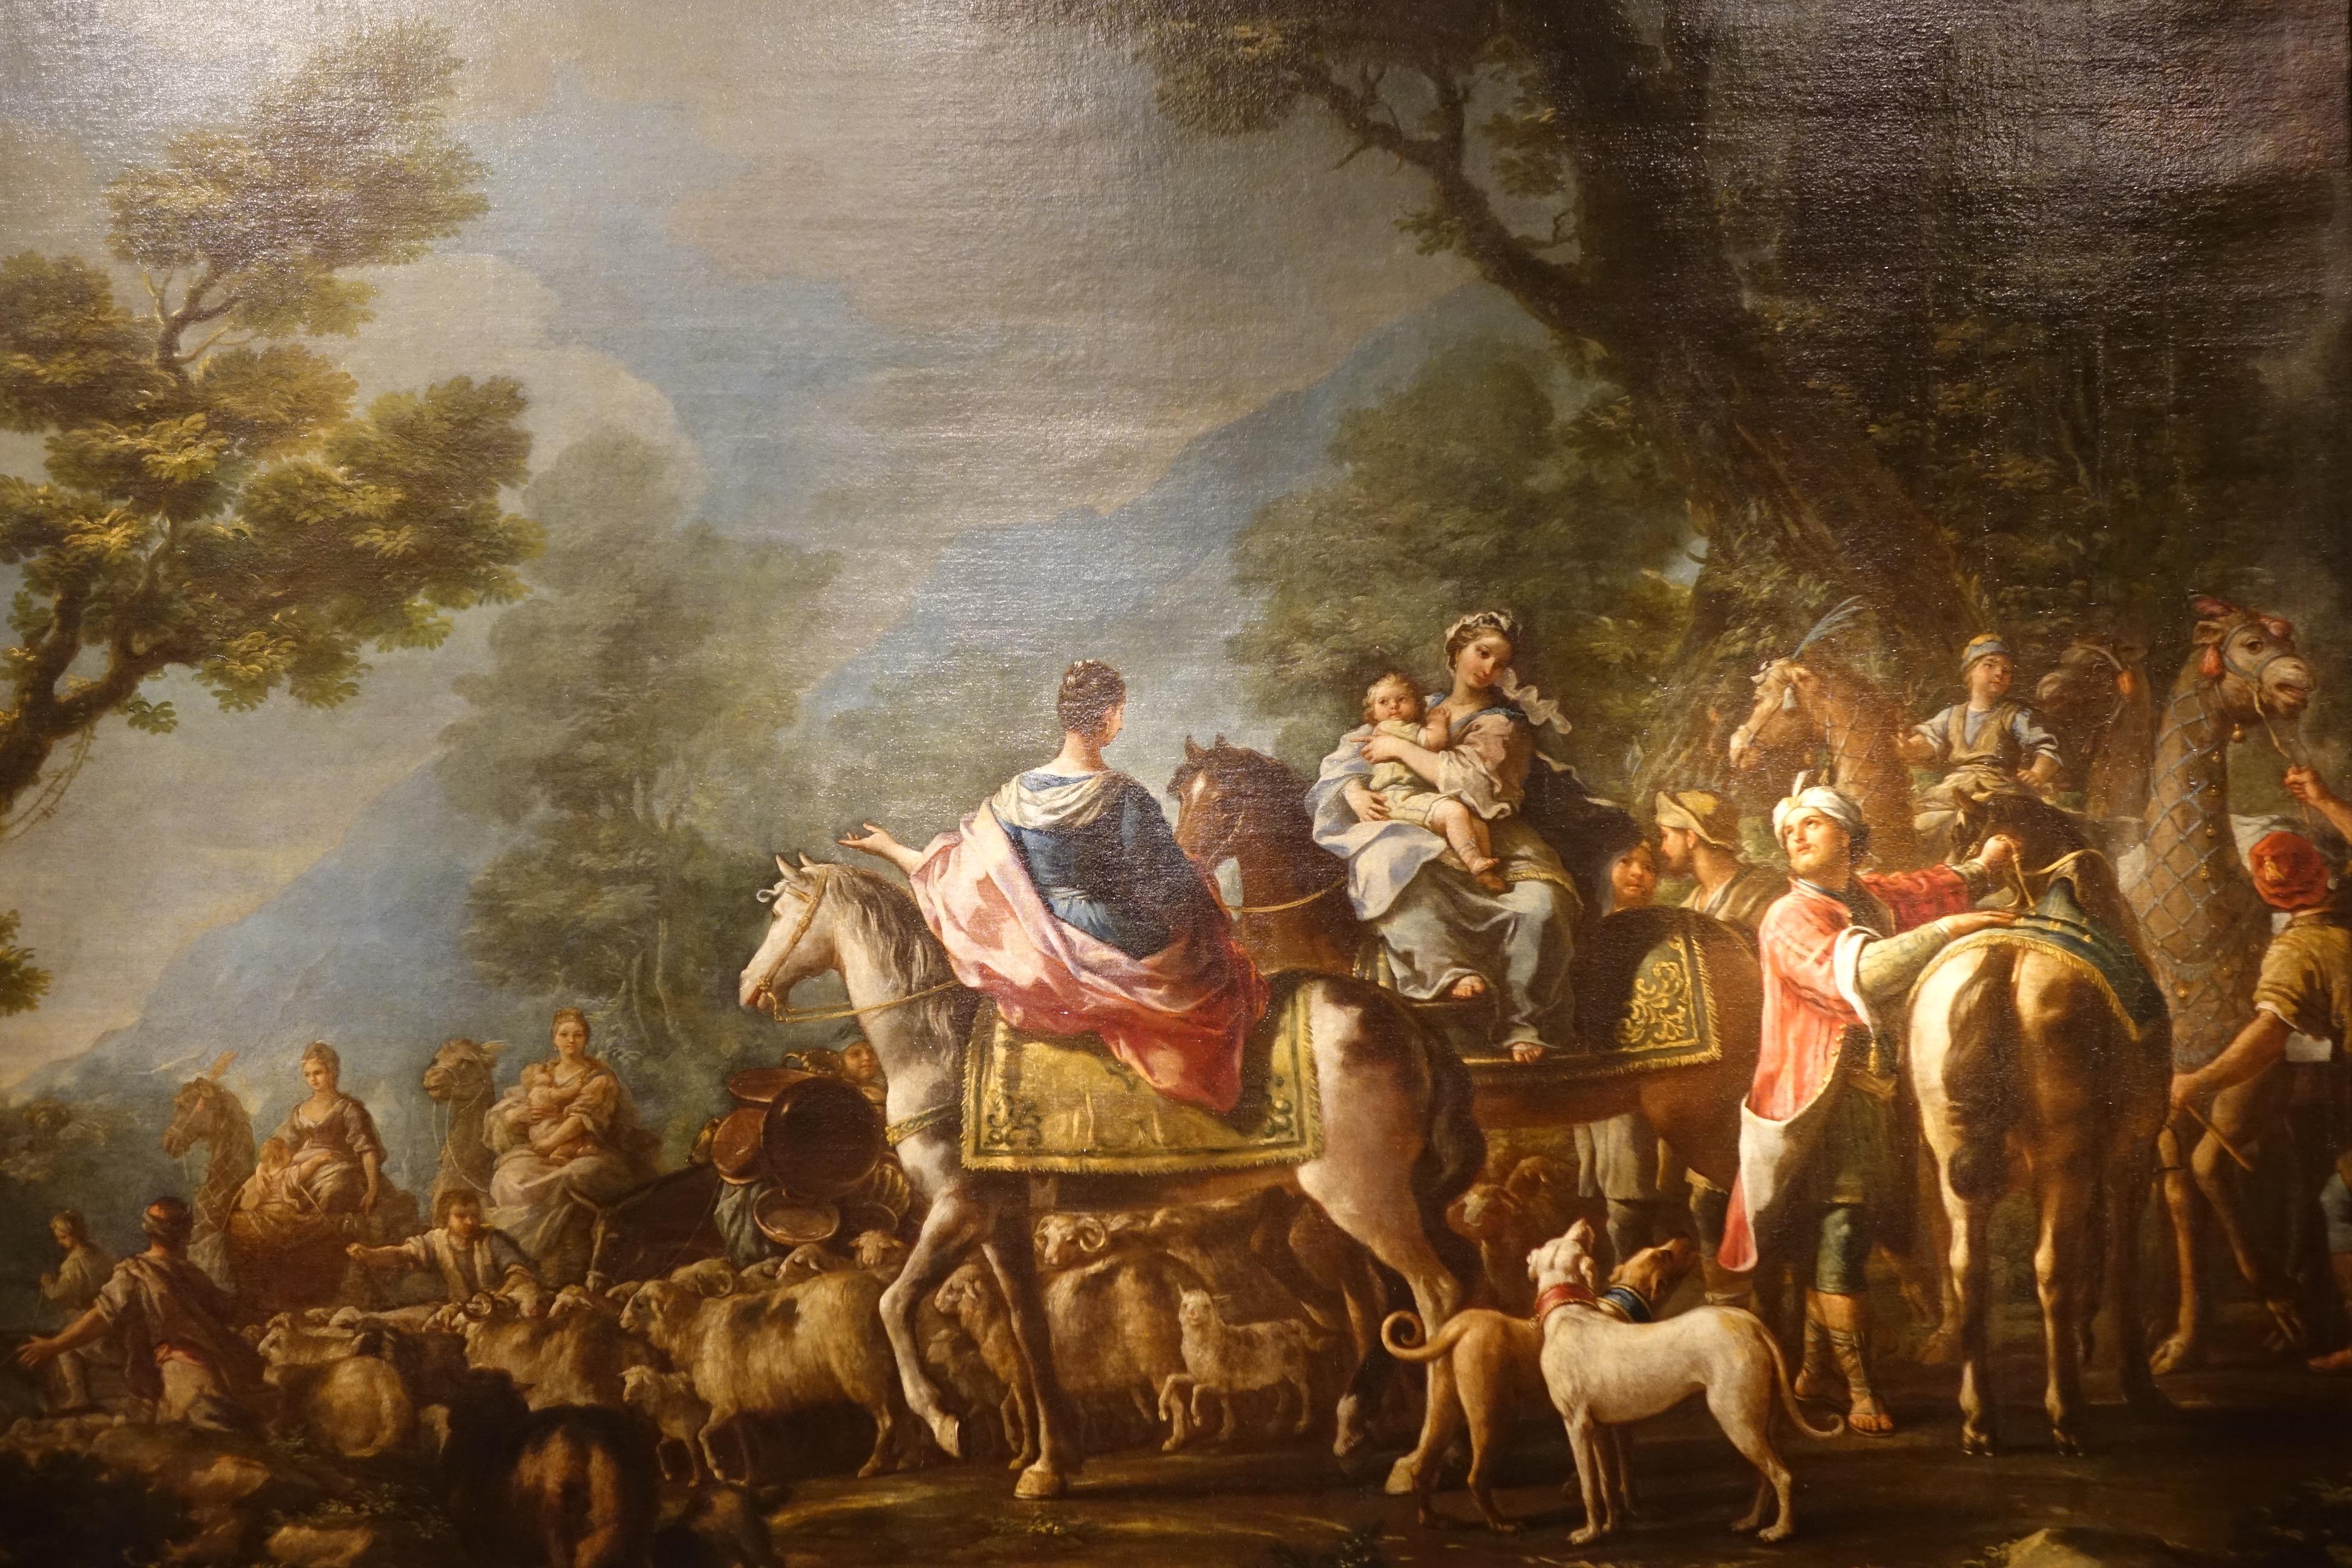 Large  painting,oil on canvas representing the departure of Jacob from Laban (Genesis 29-32).
Jacob, set out for the land of Haran in search of a woman, first marrying Leah, then Rachel, the two daughters of Laban.
Jacob begot twelve sons, all born